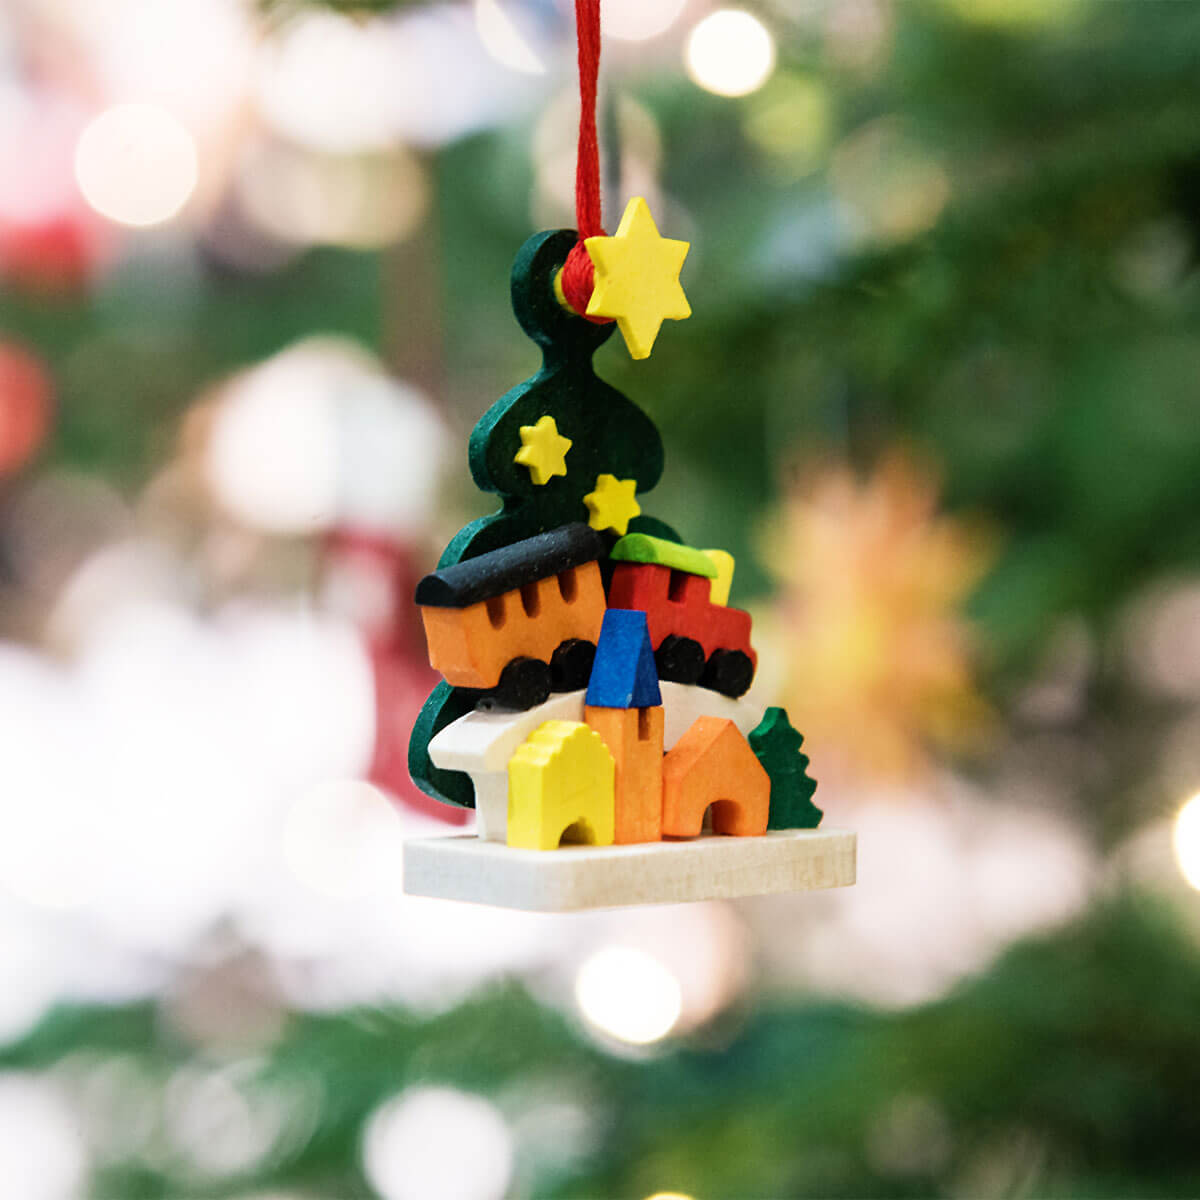 Christmas Tree & Gifts Ornament with doll's pram